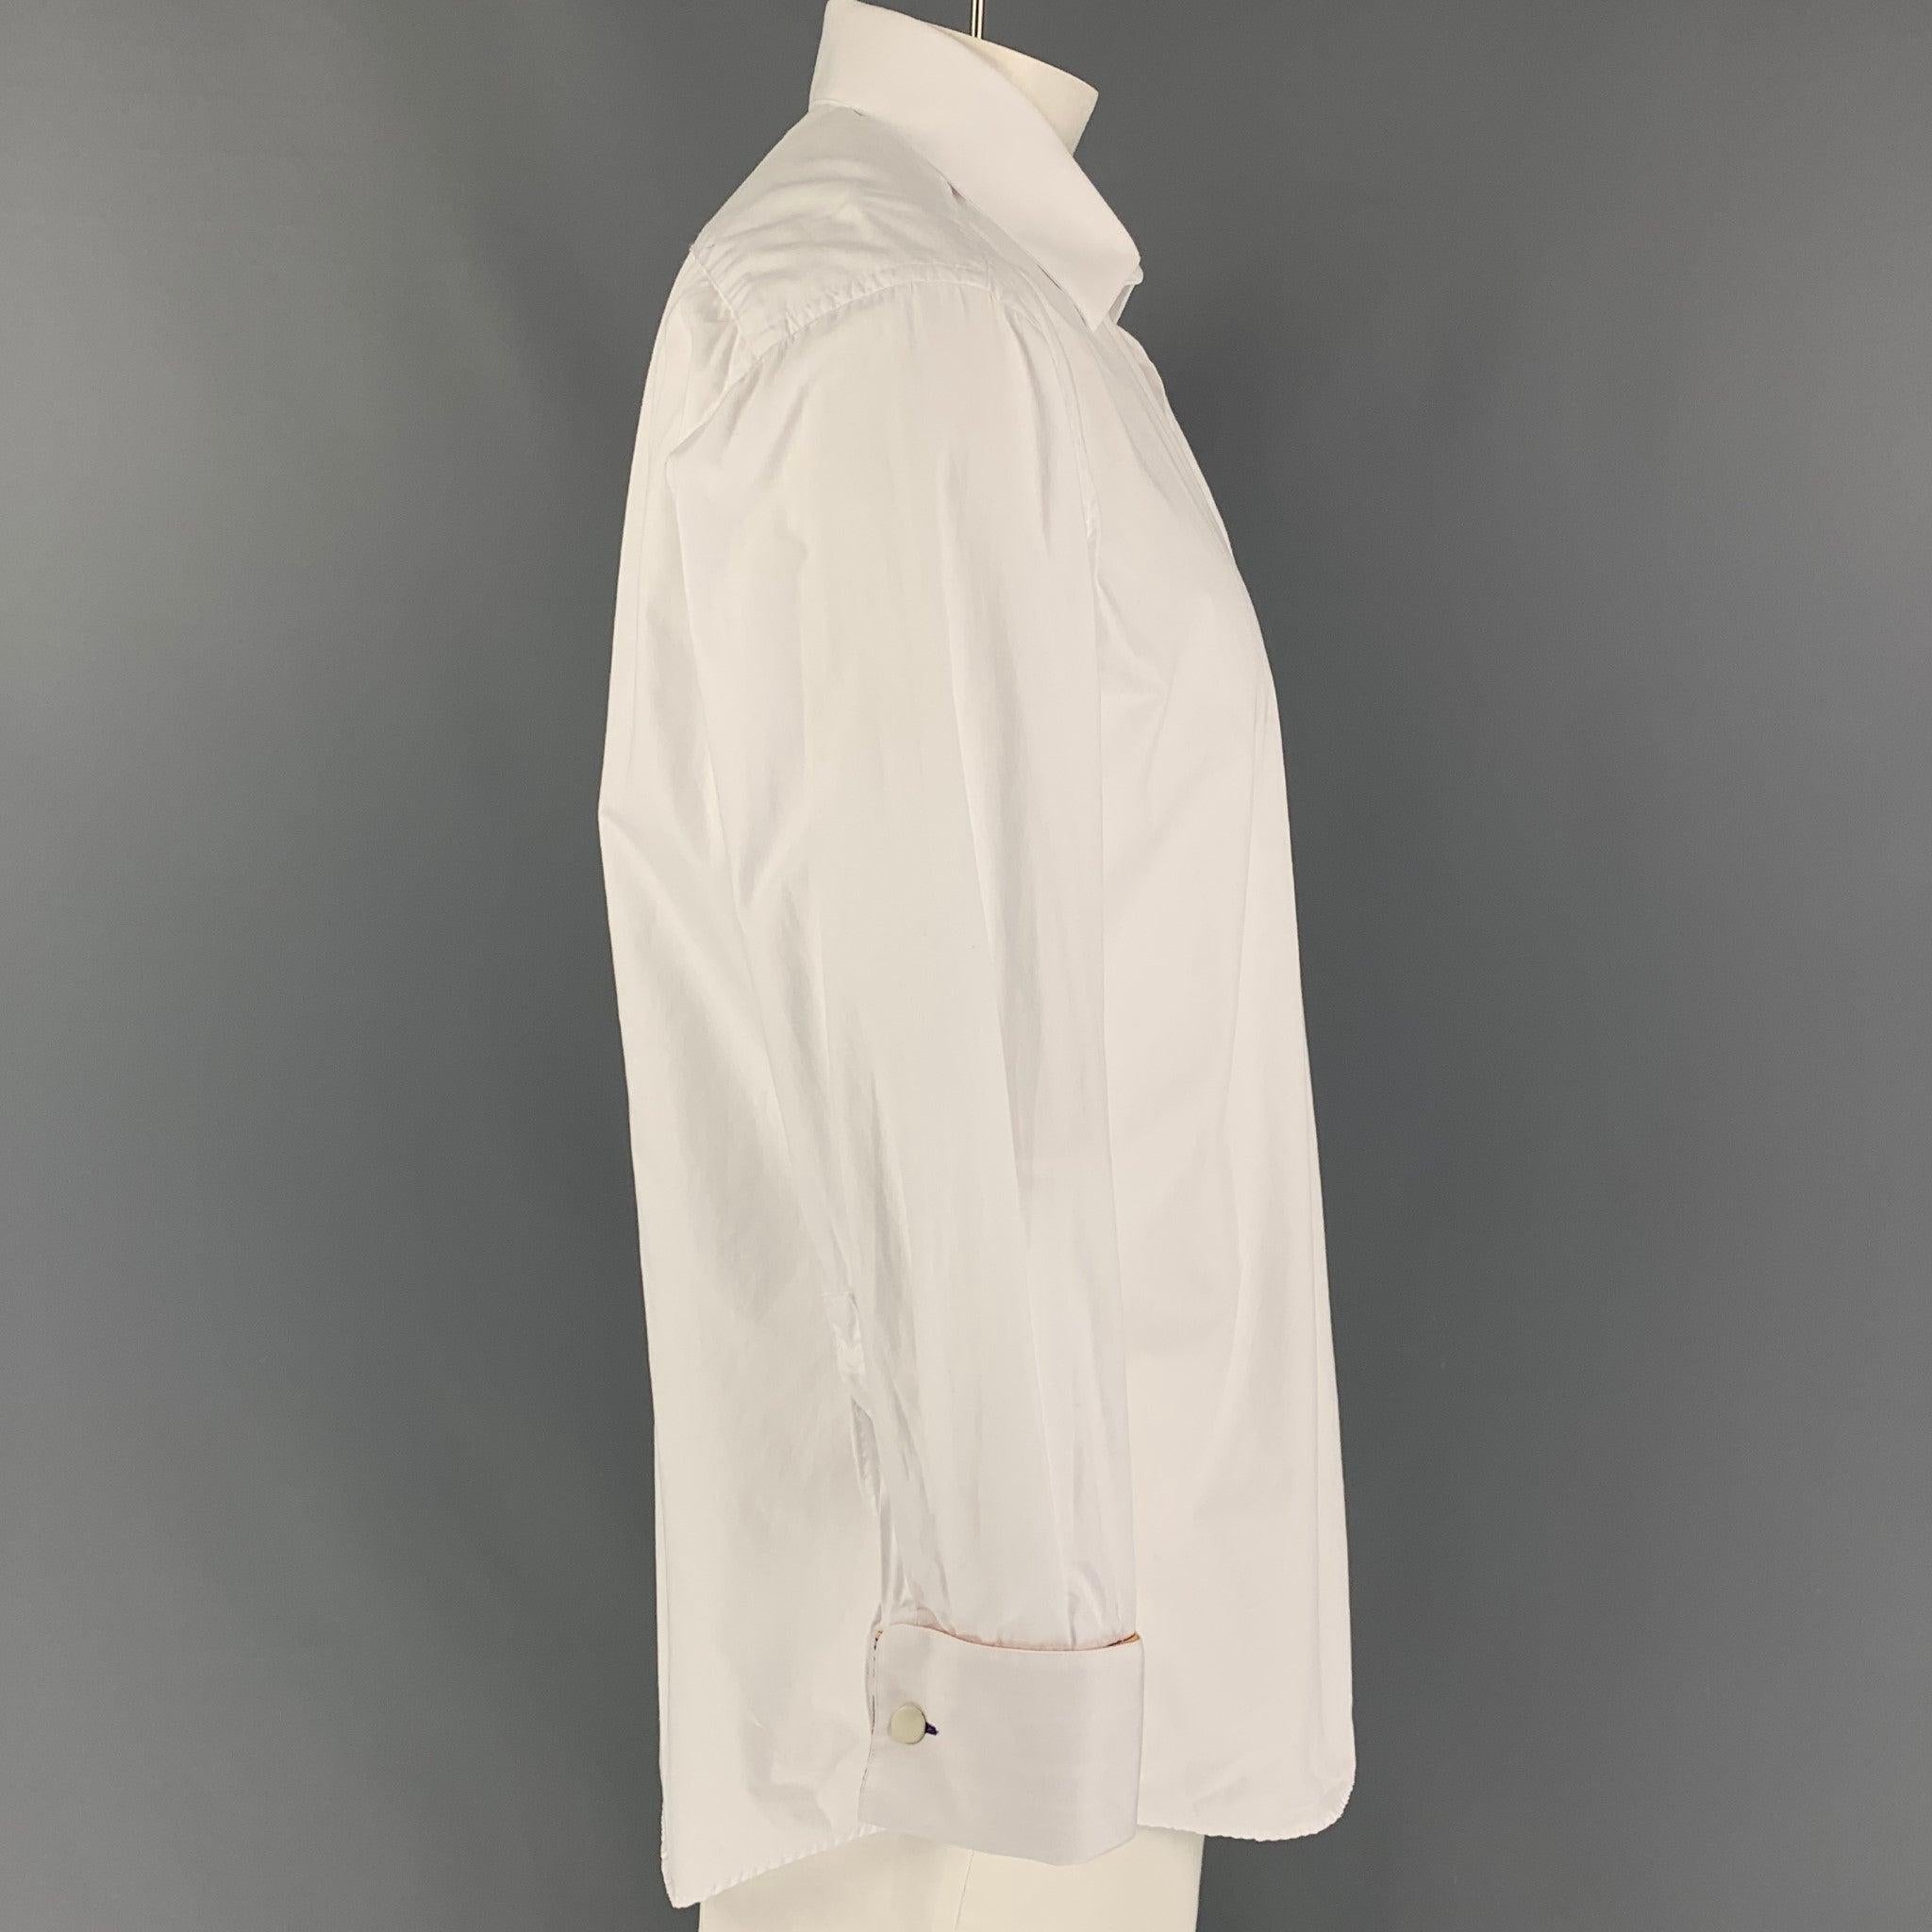 PAUL SMITH long sleeve shirt comes in a white cotton featuring a patch pocket, spread collar, french cuffs, and a button up closure. Doesn't include cufflinks. Made in Italy.
Very Good
Pre-Owned Condition. 

Marked:   17.5/44 

Measurements: 
